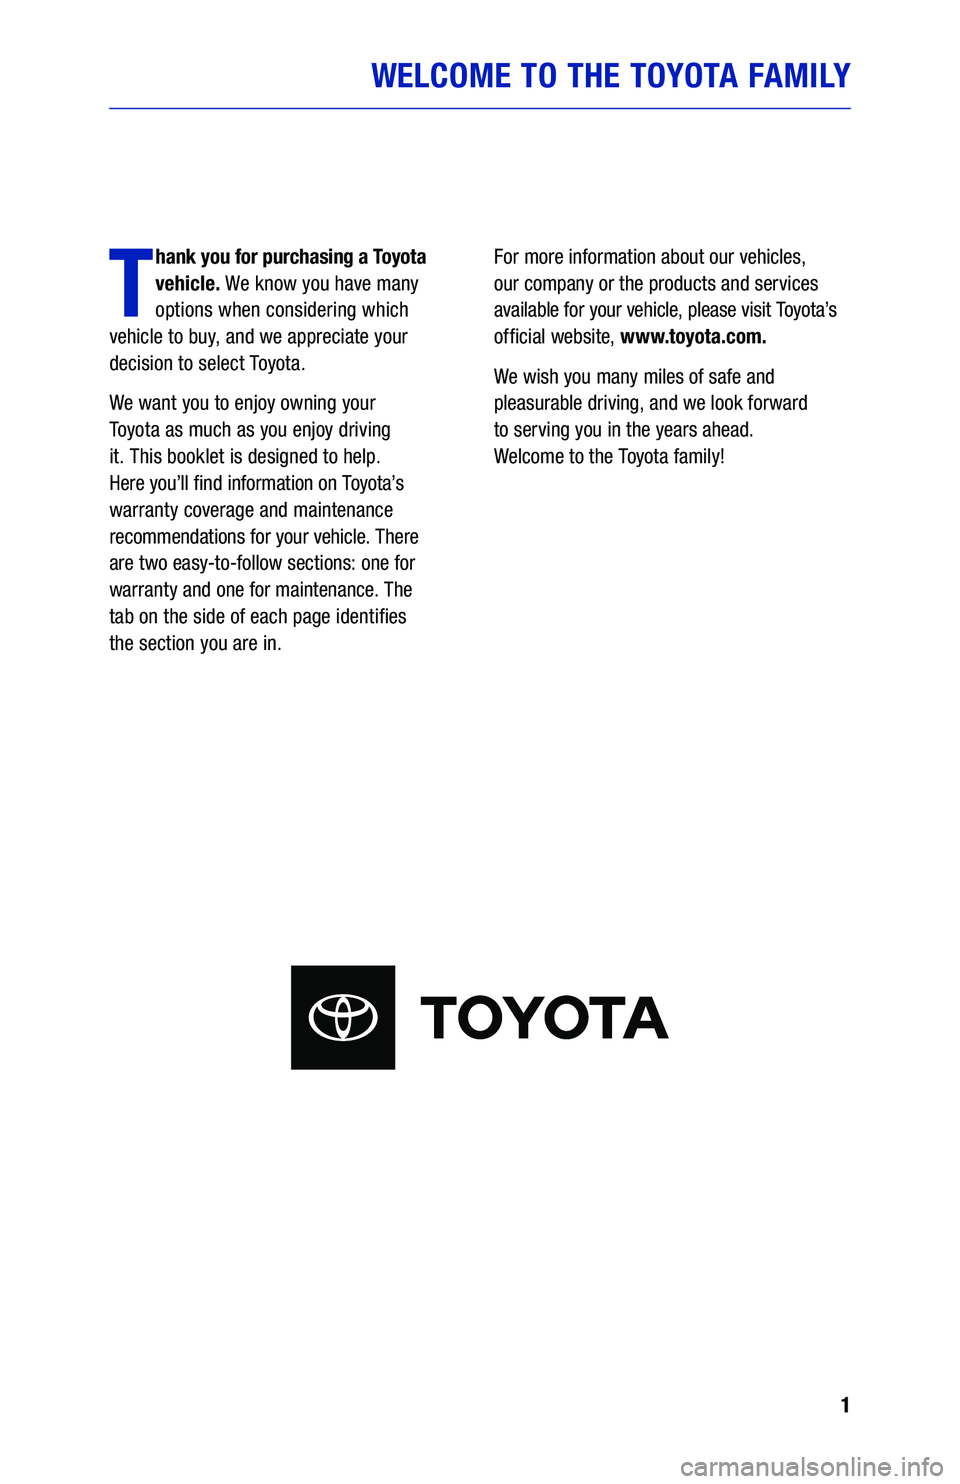 TOYOTA PRIUS 2021  Warranties & Maintenance Guides (in English) 1
WELCOME TO THE TOYOTA FAMILY
T
hank you for purchasing a Toyota 
vehicle. We know you have many 
options when considering which  
vehicle to buy, and we appreciate your 
decision to select Toyota.
W